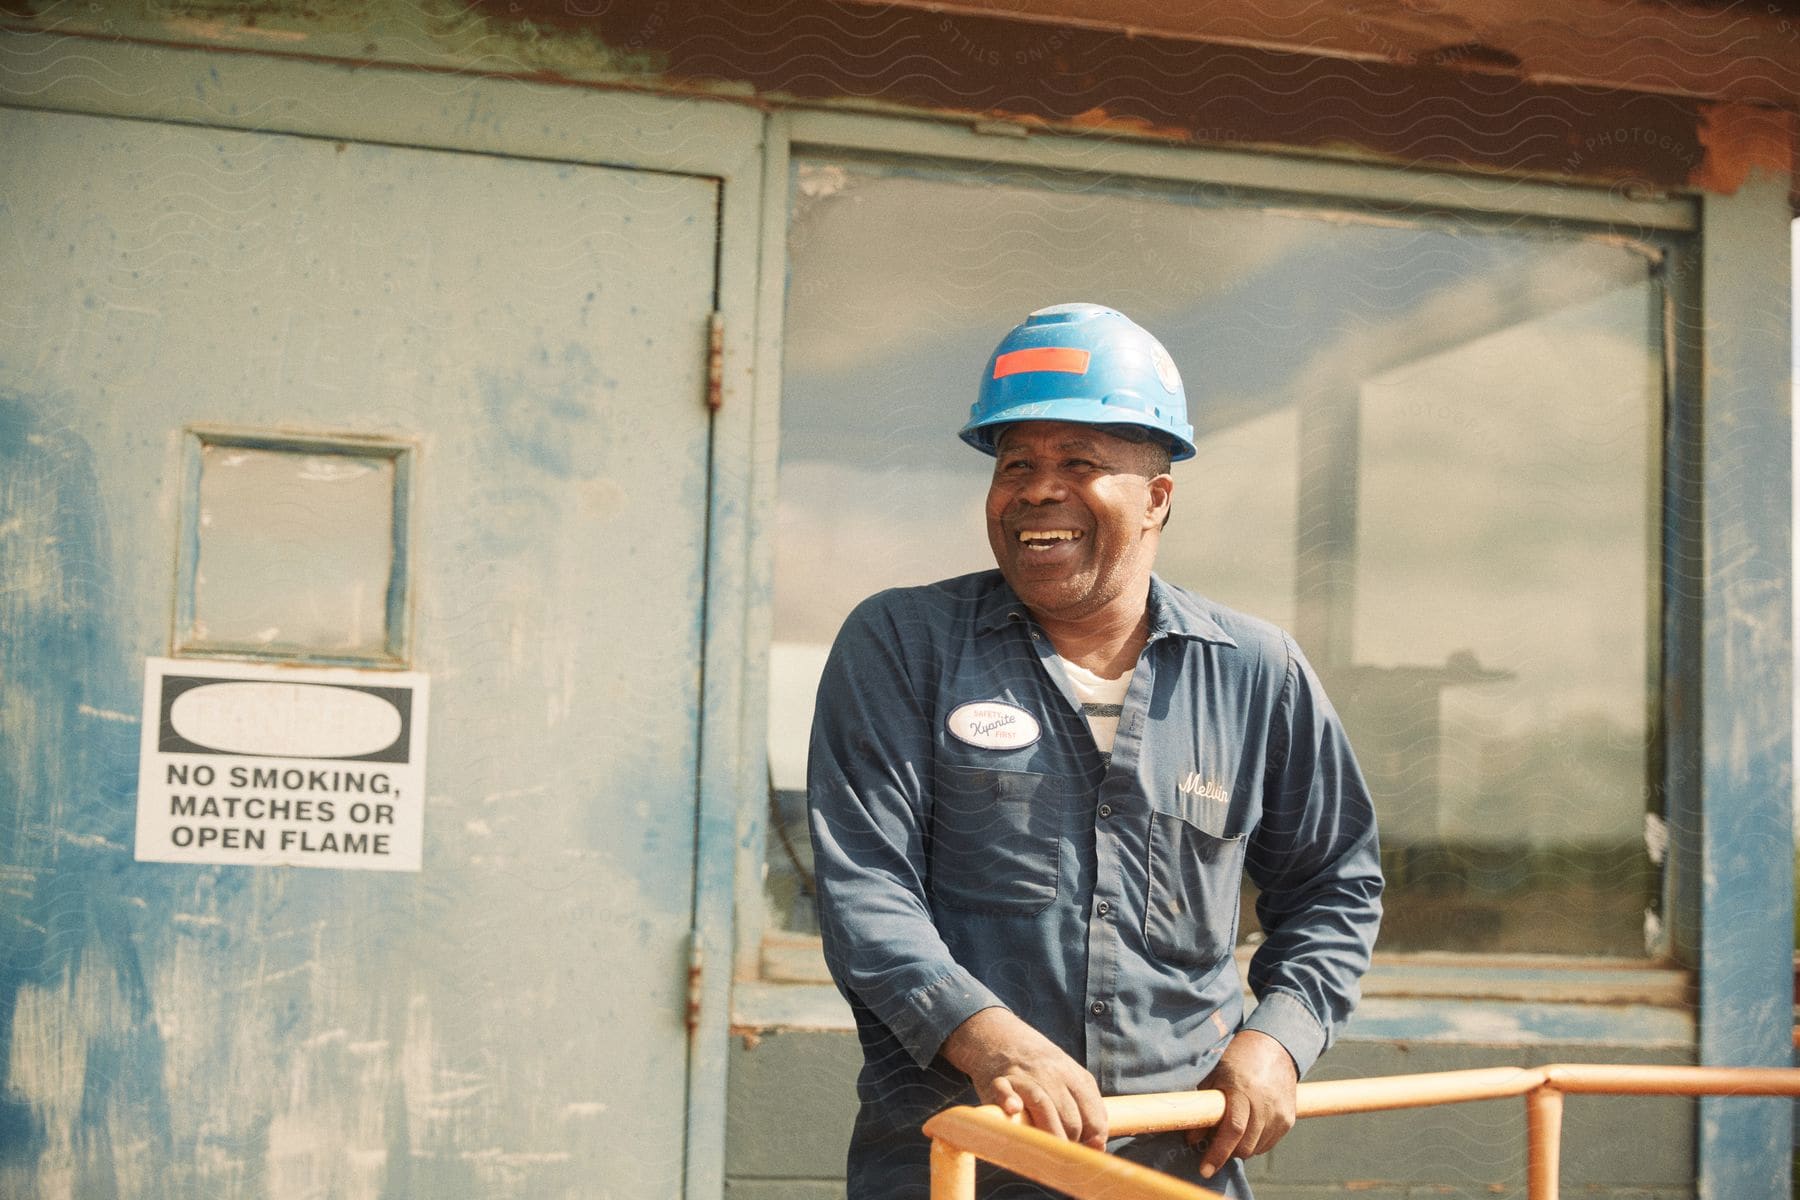 A worker in blue coveralls and hard hat standing outside holding a handrail and smiling in the sun